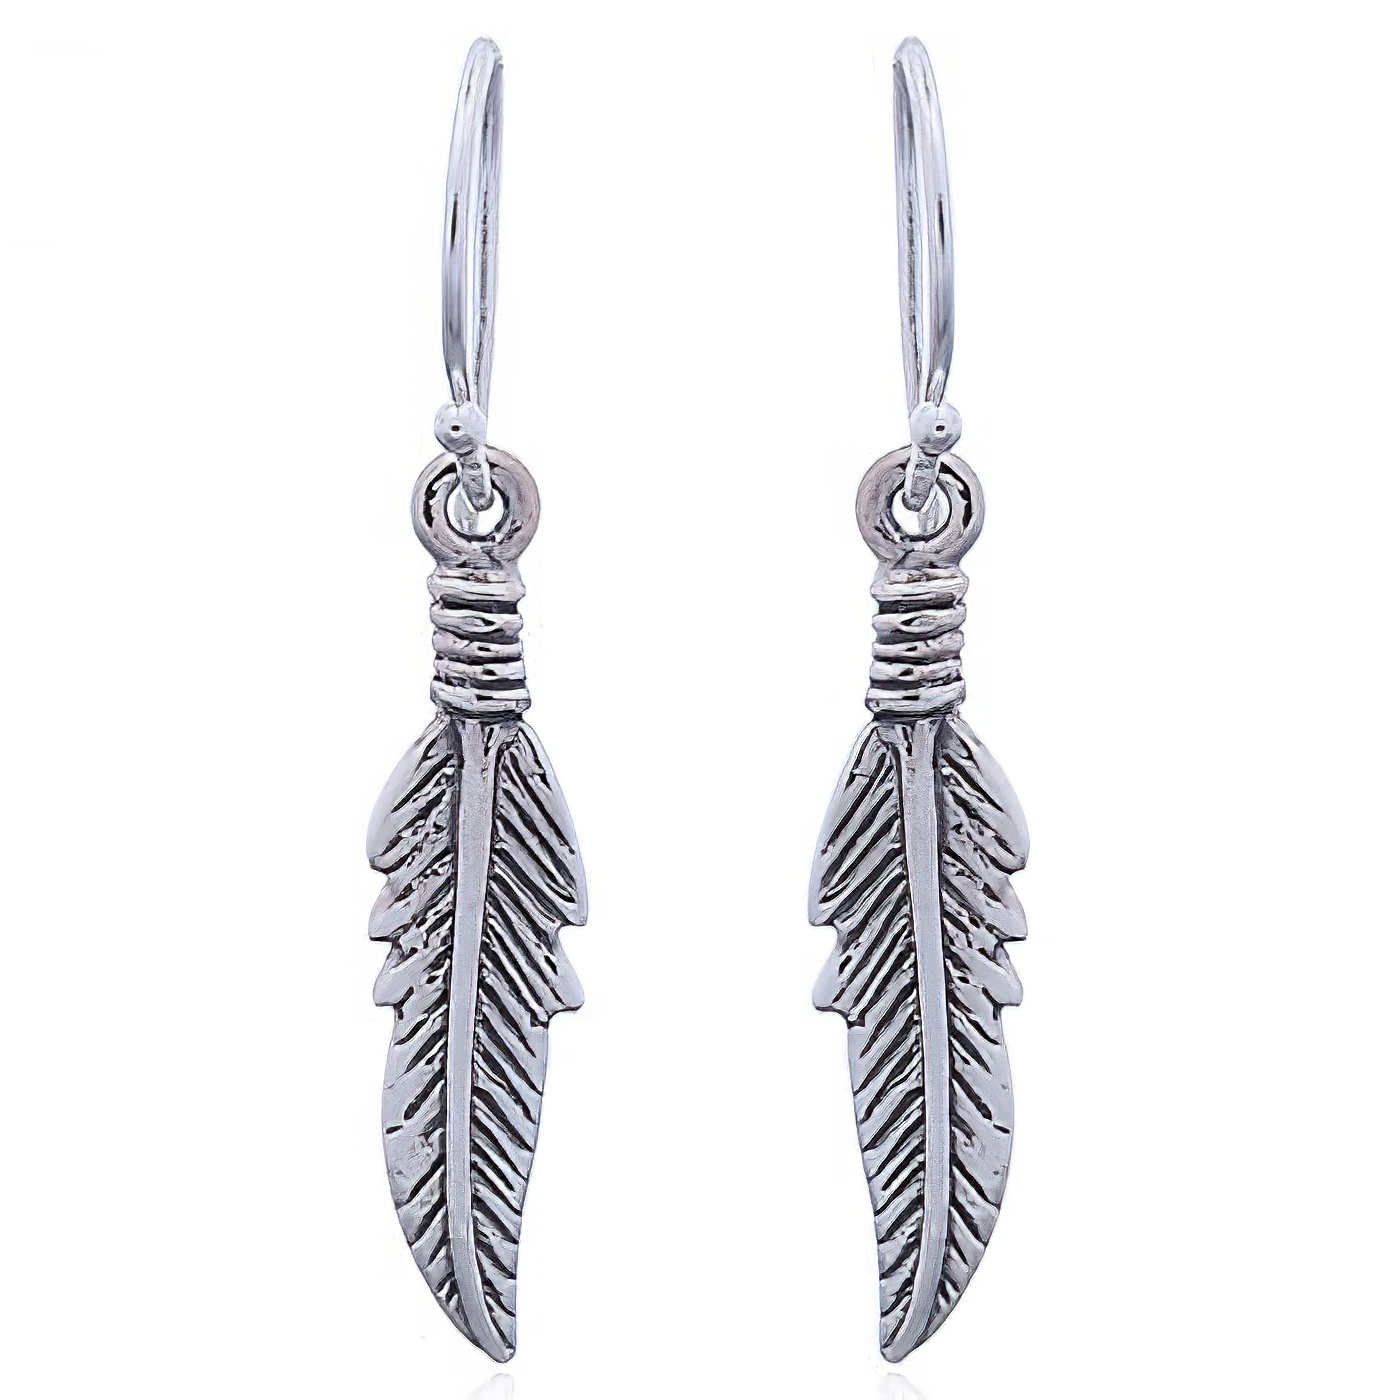 Antiqued Ornate Sterling Silver Feather Dangle Earrings by BeYindi 